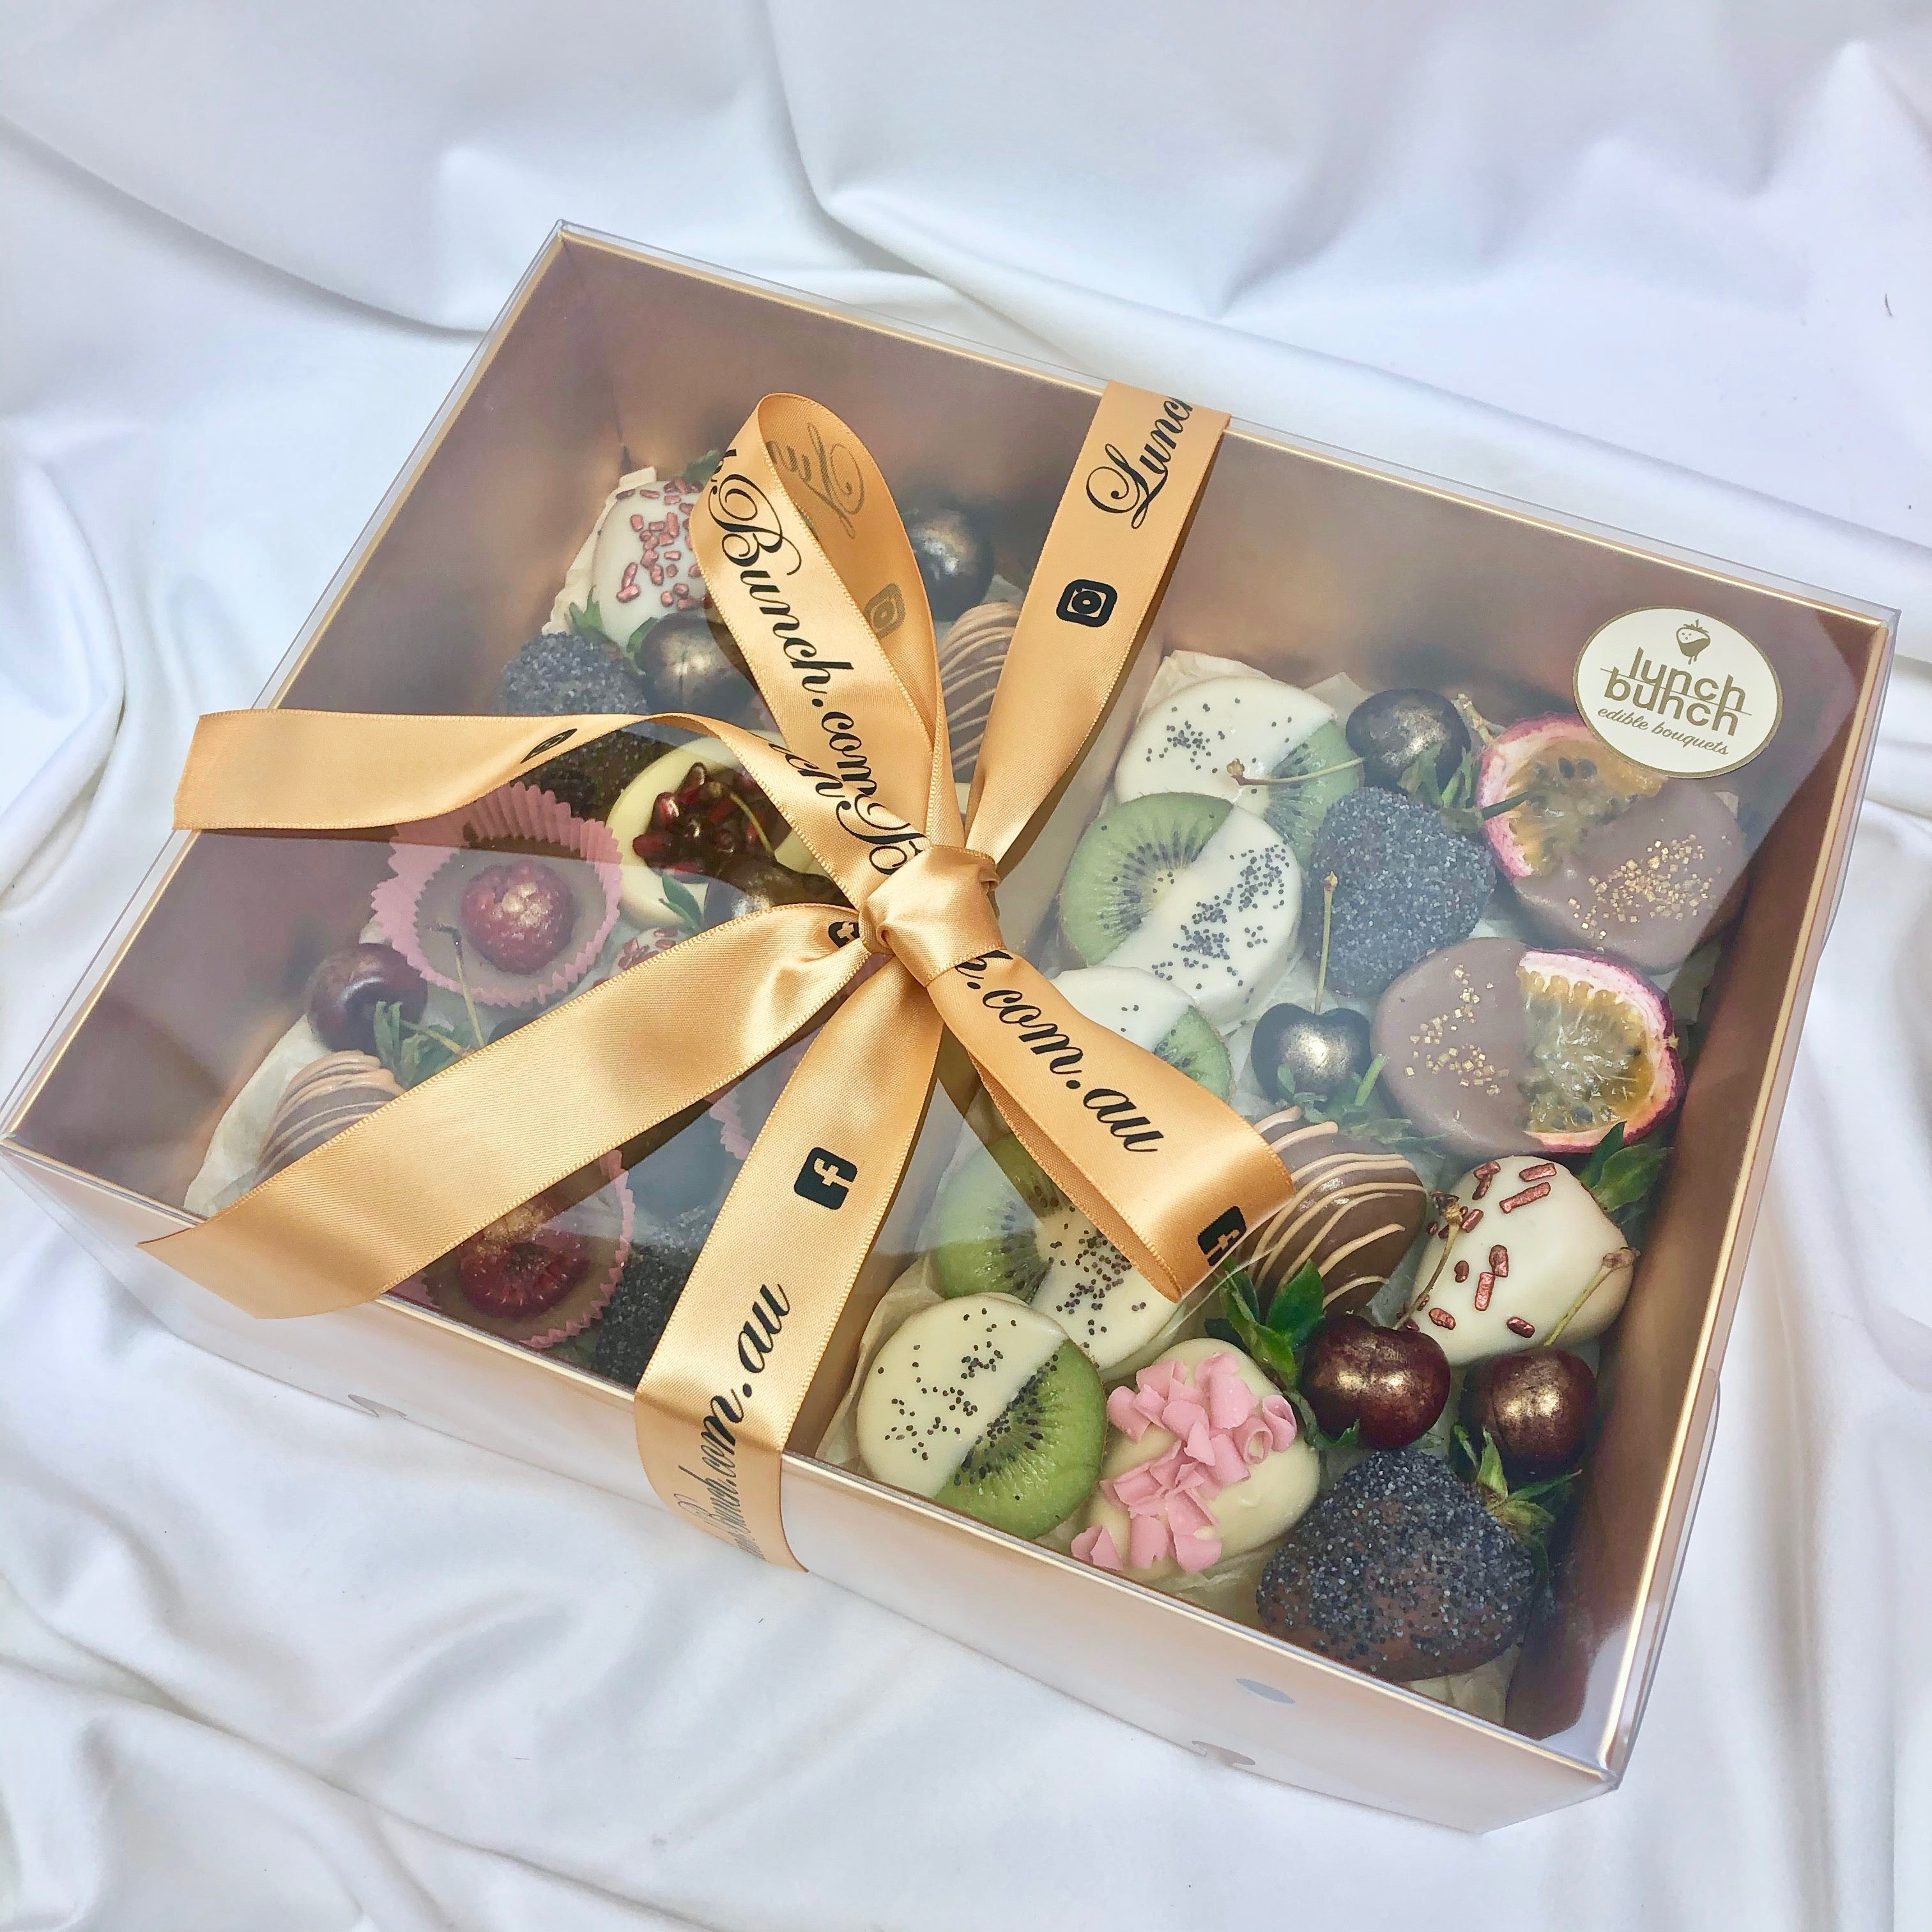 Mixed Chocolate Fruits & Berries Gift Hamper thank you basket anniversary gift chocolate fruits birthday basket gift hamper same day delivery